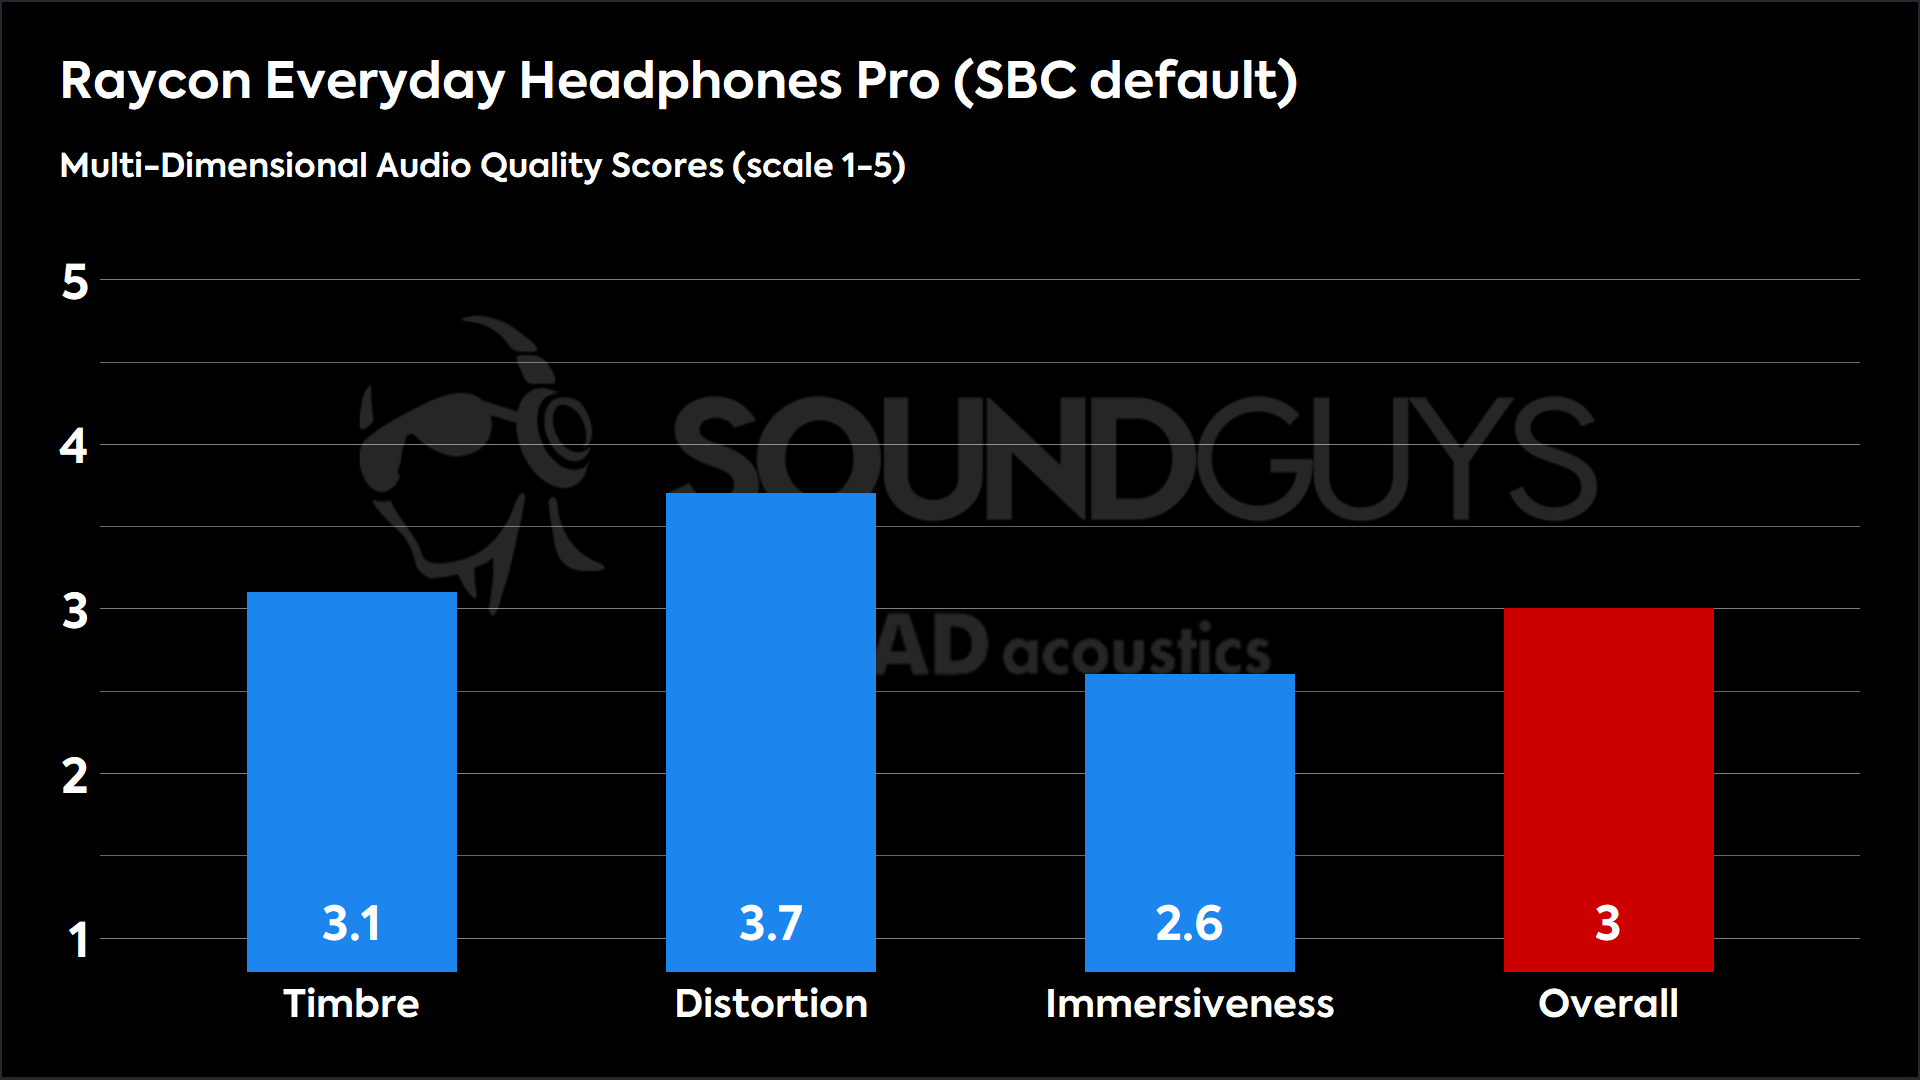 This chart shows the MDAQS results for the Raycon Everyday Headphones Pro in SBC default mode. The Timbre score is 3.1, The Distortion score is 3.7, the Immersiveness score is 2.6, and the Overall Score is 3).